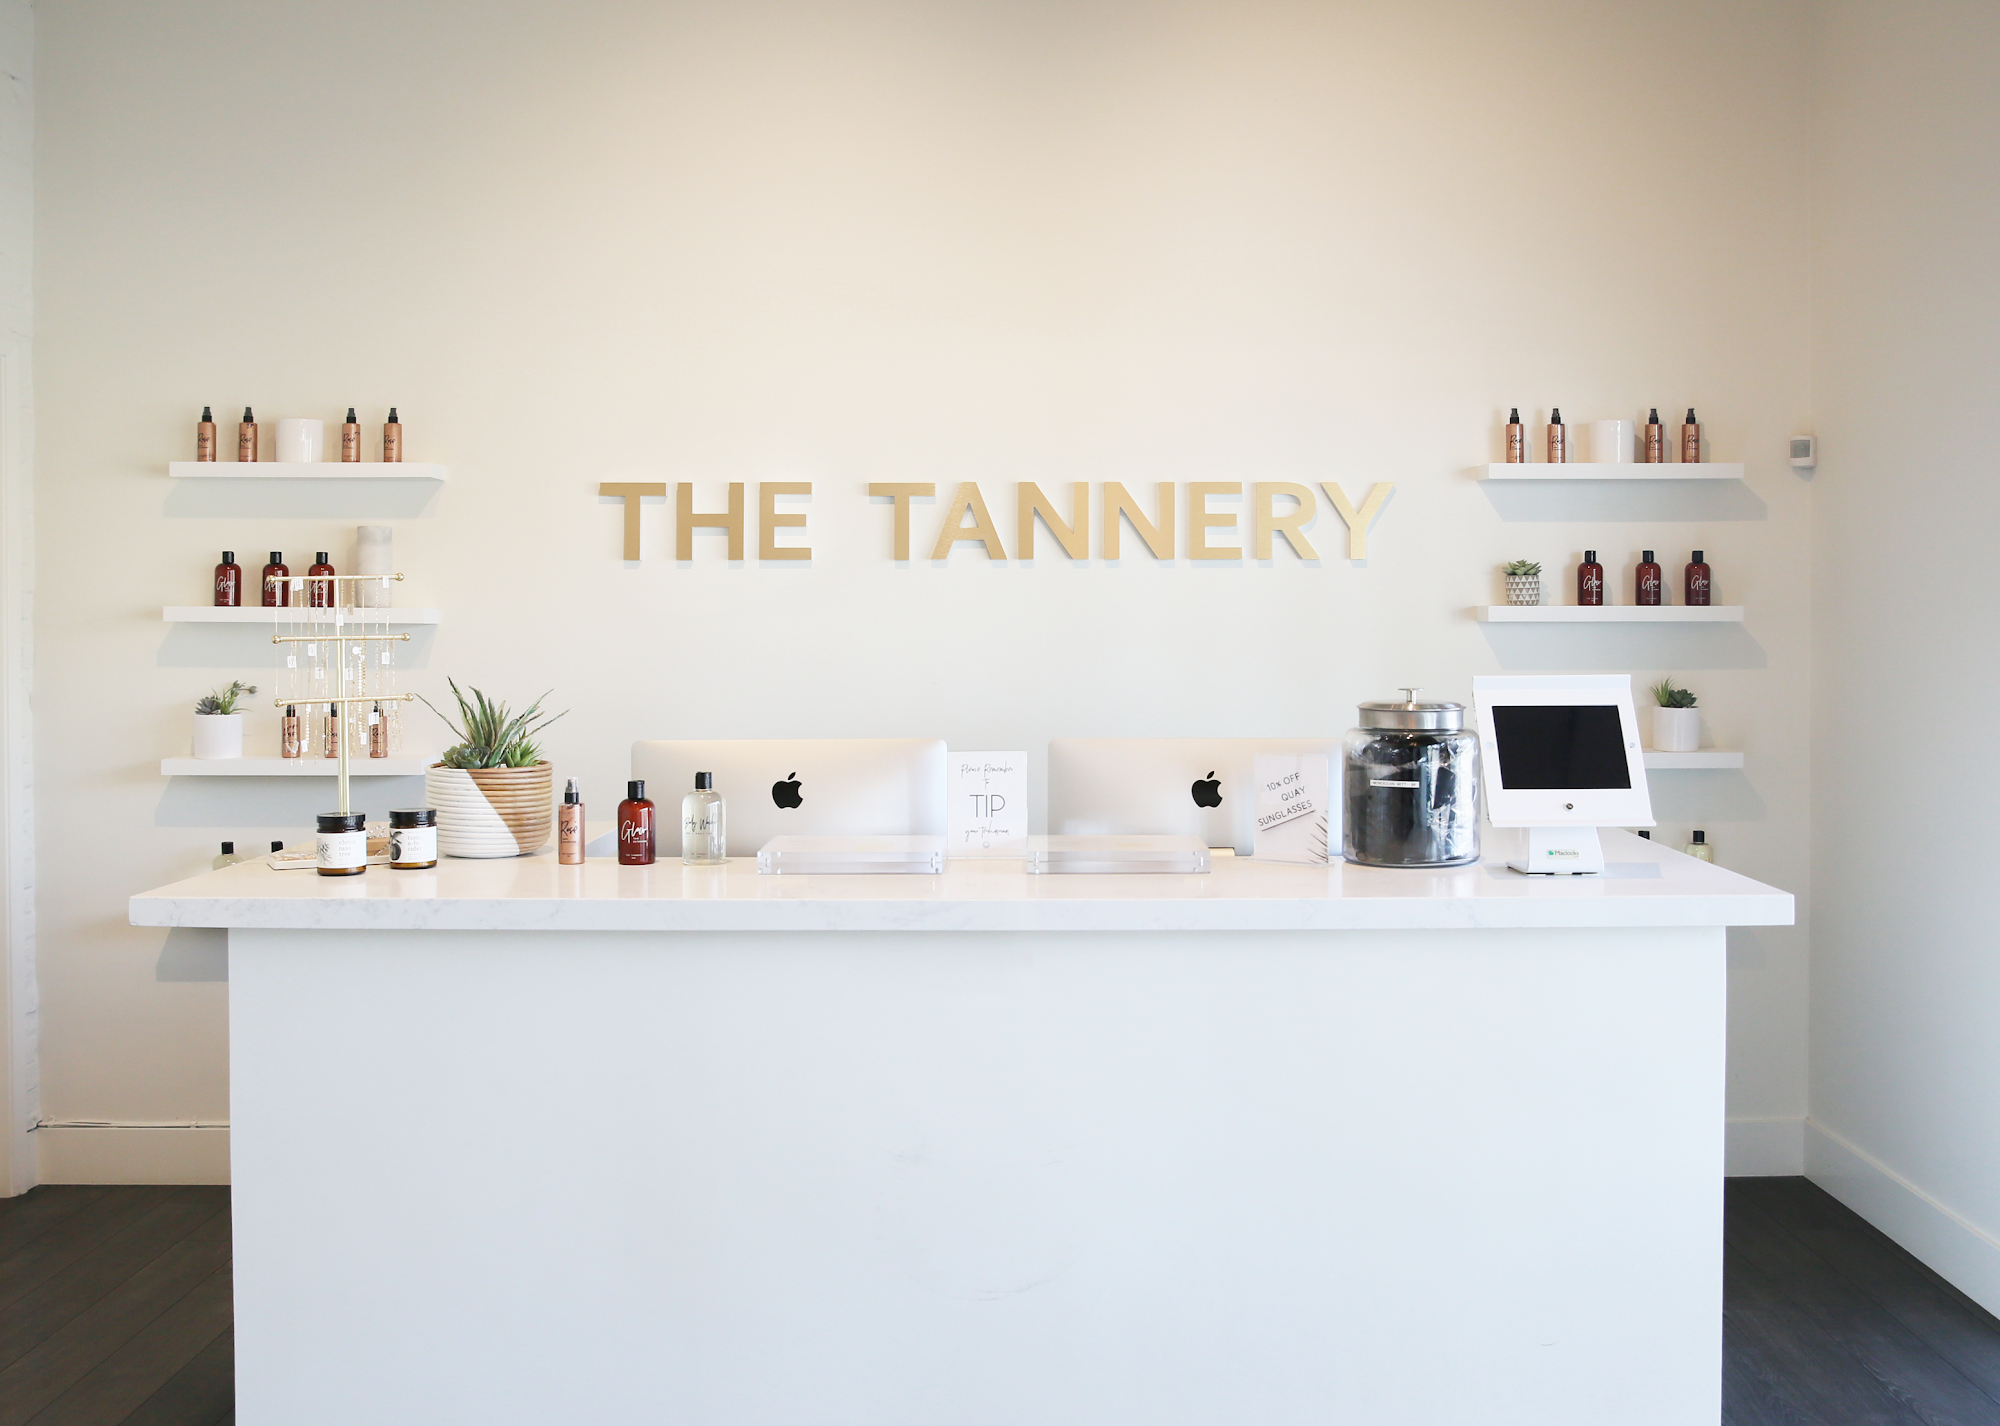 The TANNERY